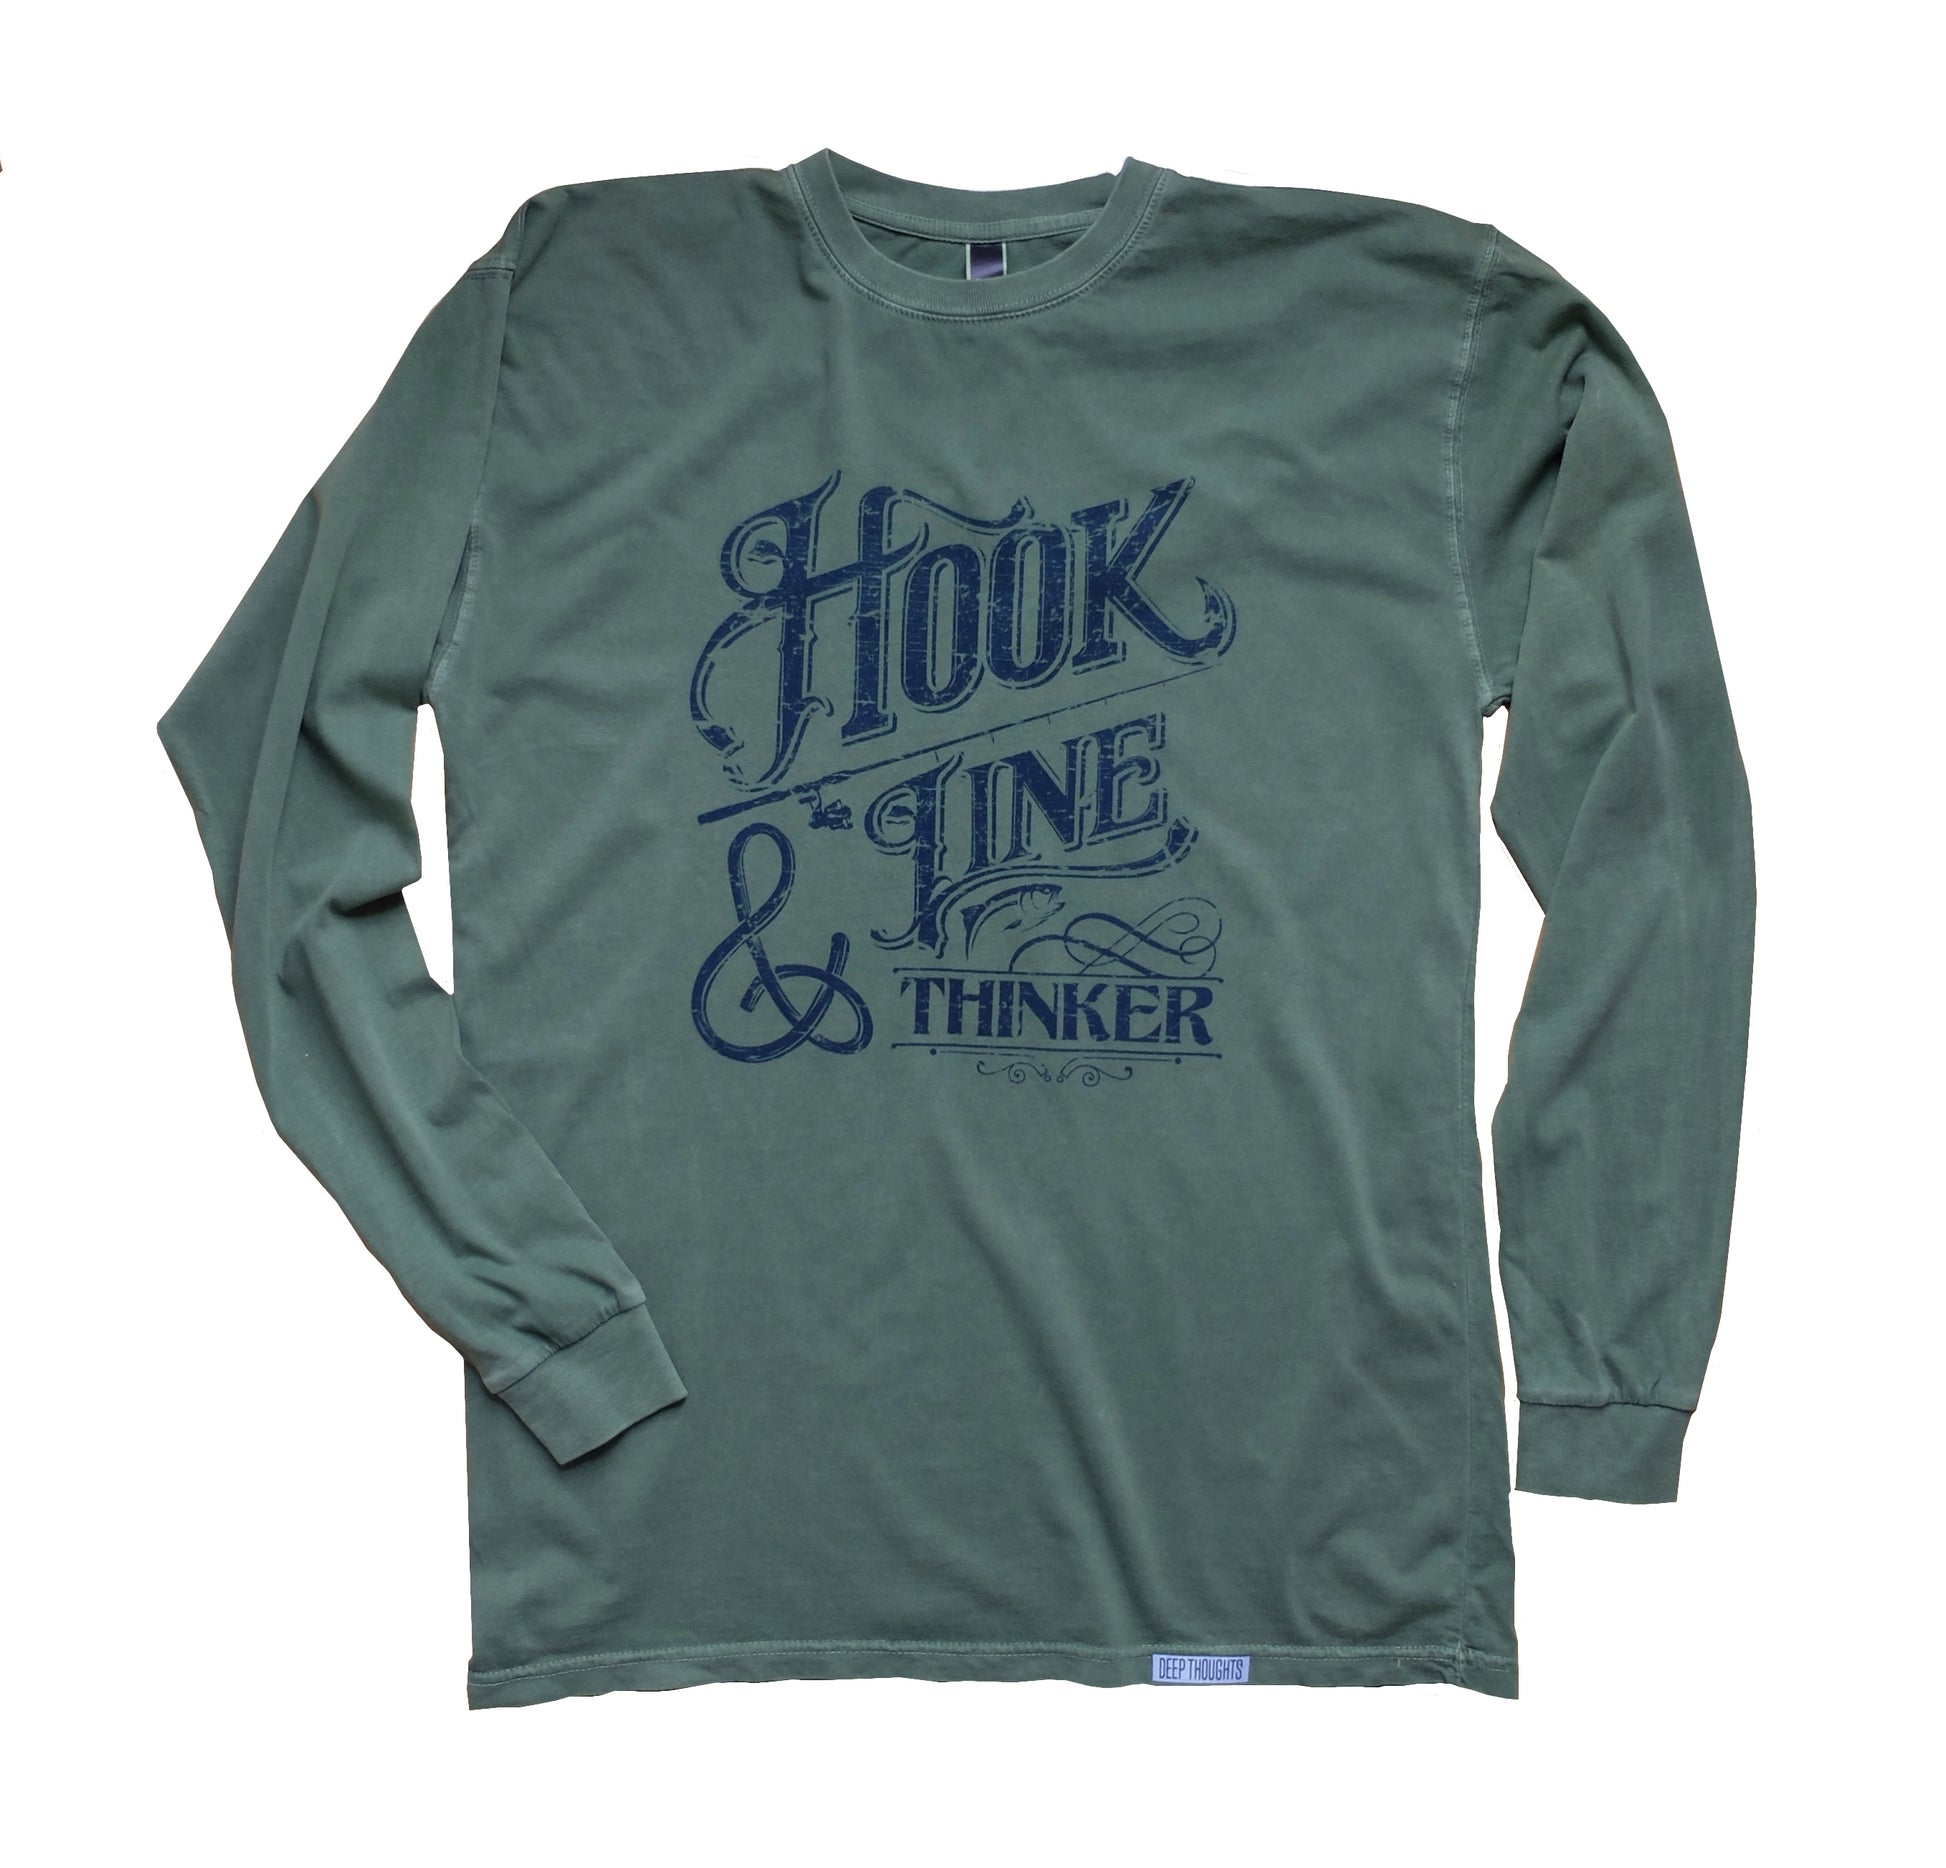 washed green long sleeve t-shirt with navy blue hook line and thinker fishing graphic